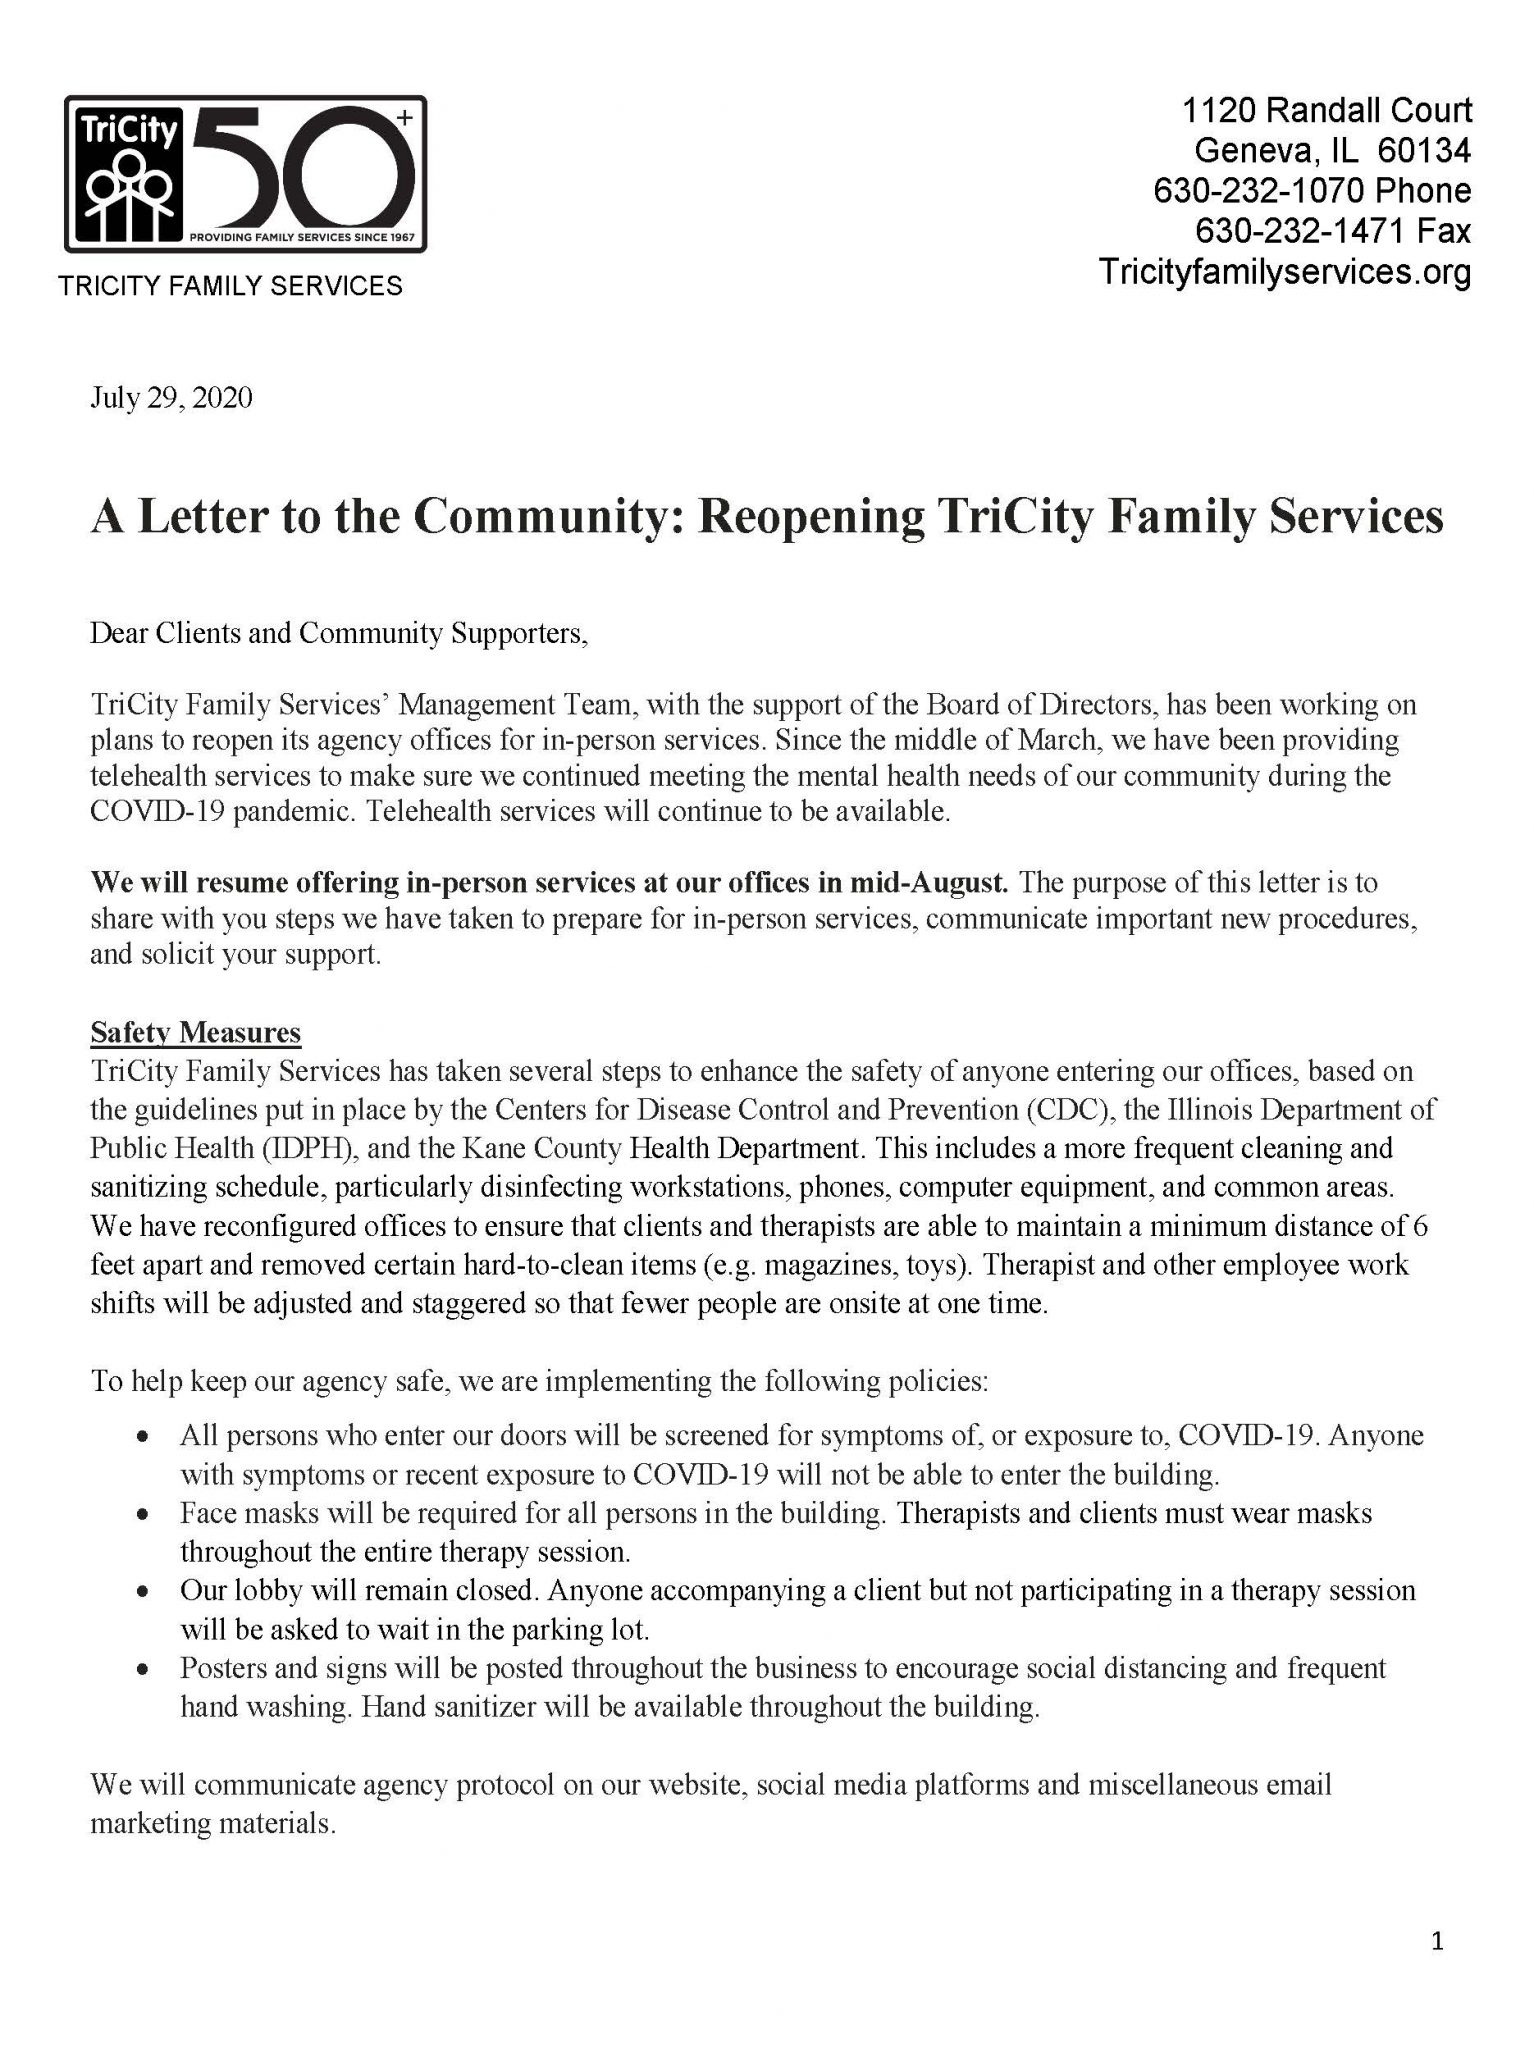 Back Letter_FINAL_Page_1 TriCity Family Services